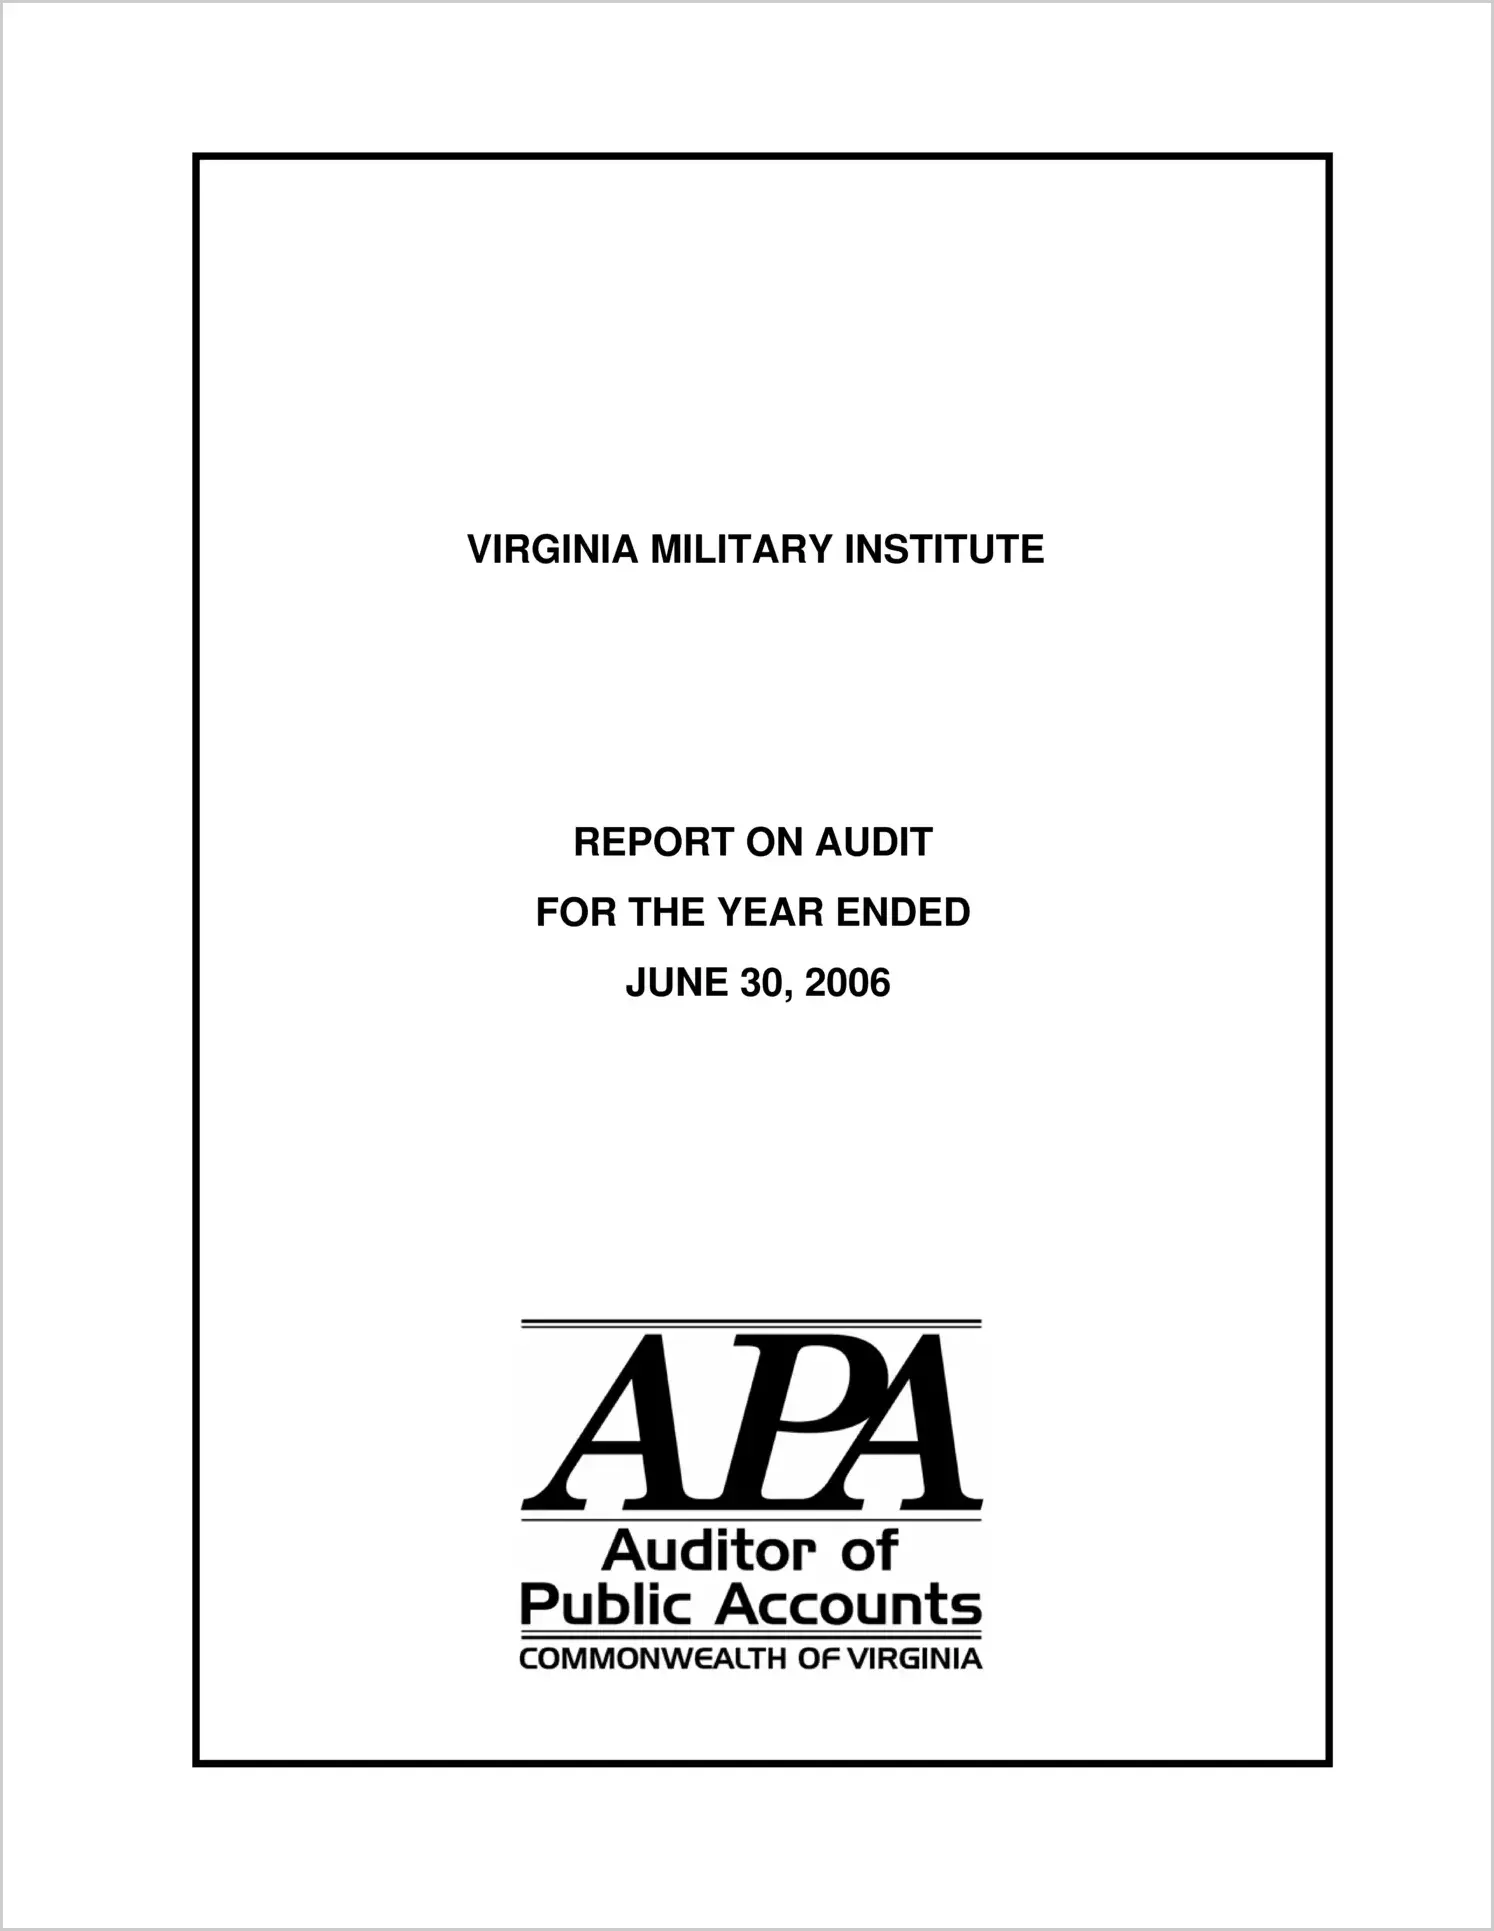 Virginia Military Institute for the year ended June 30, 2006